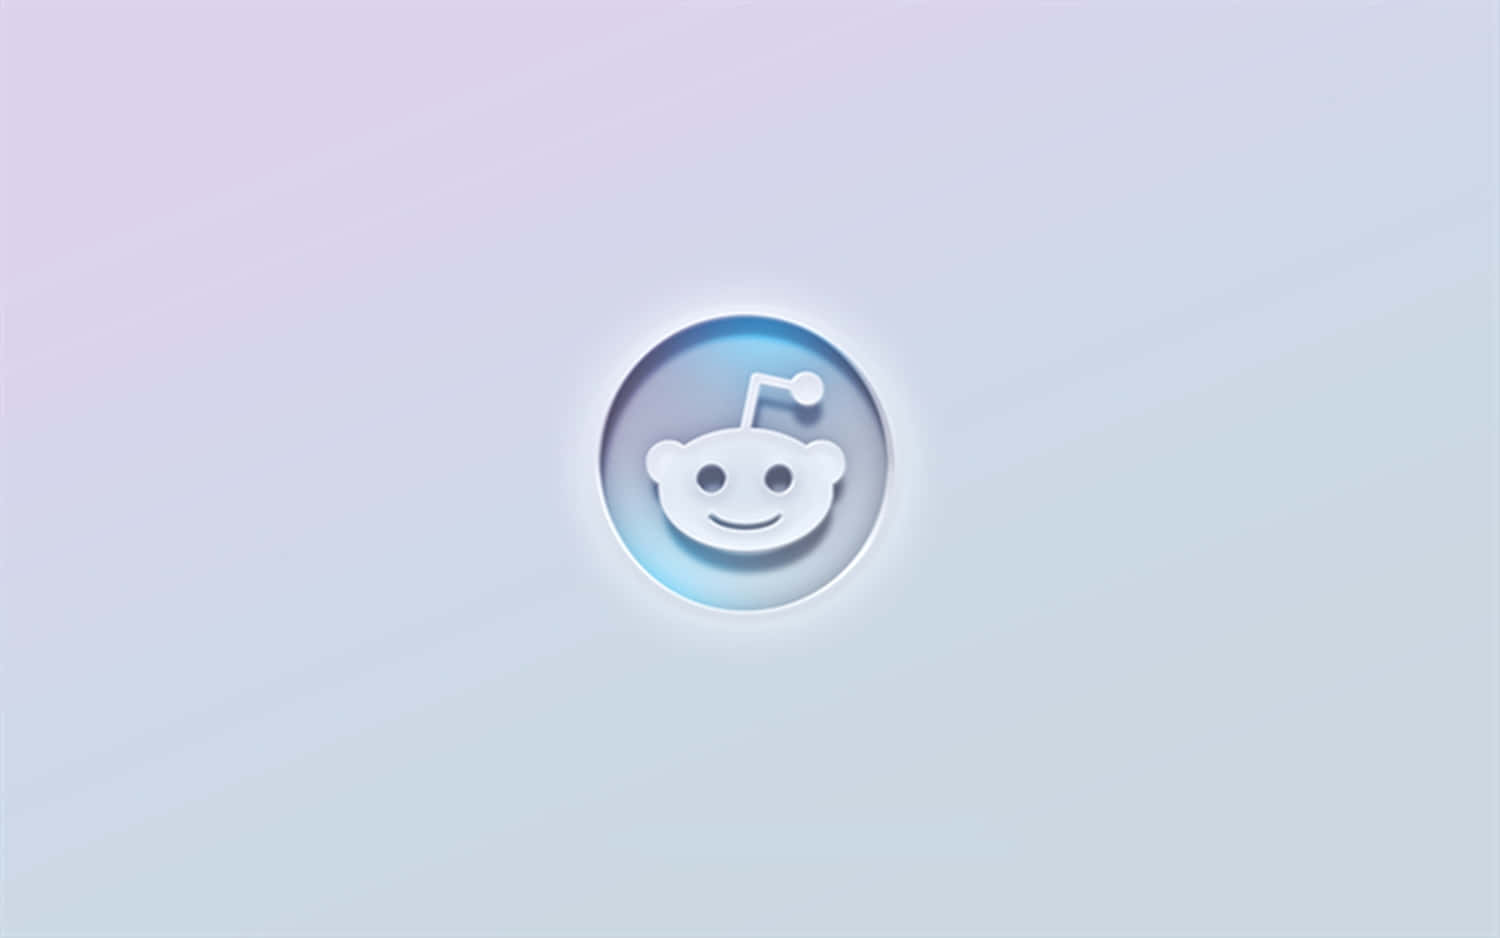 A Blue And White Icon With A Smiley Face